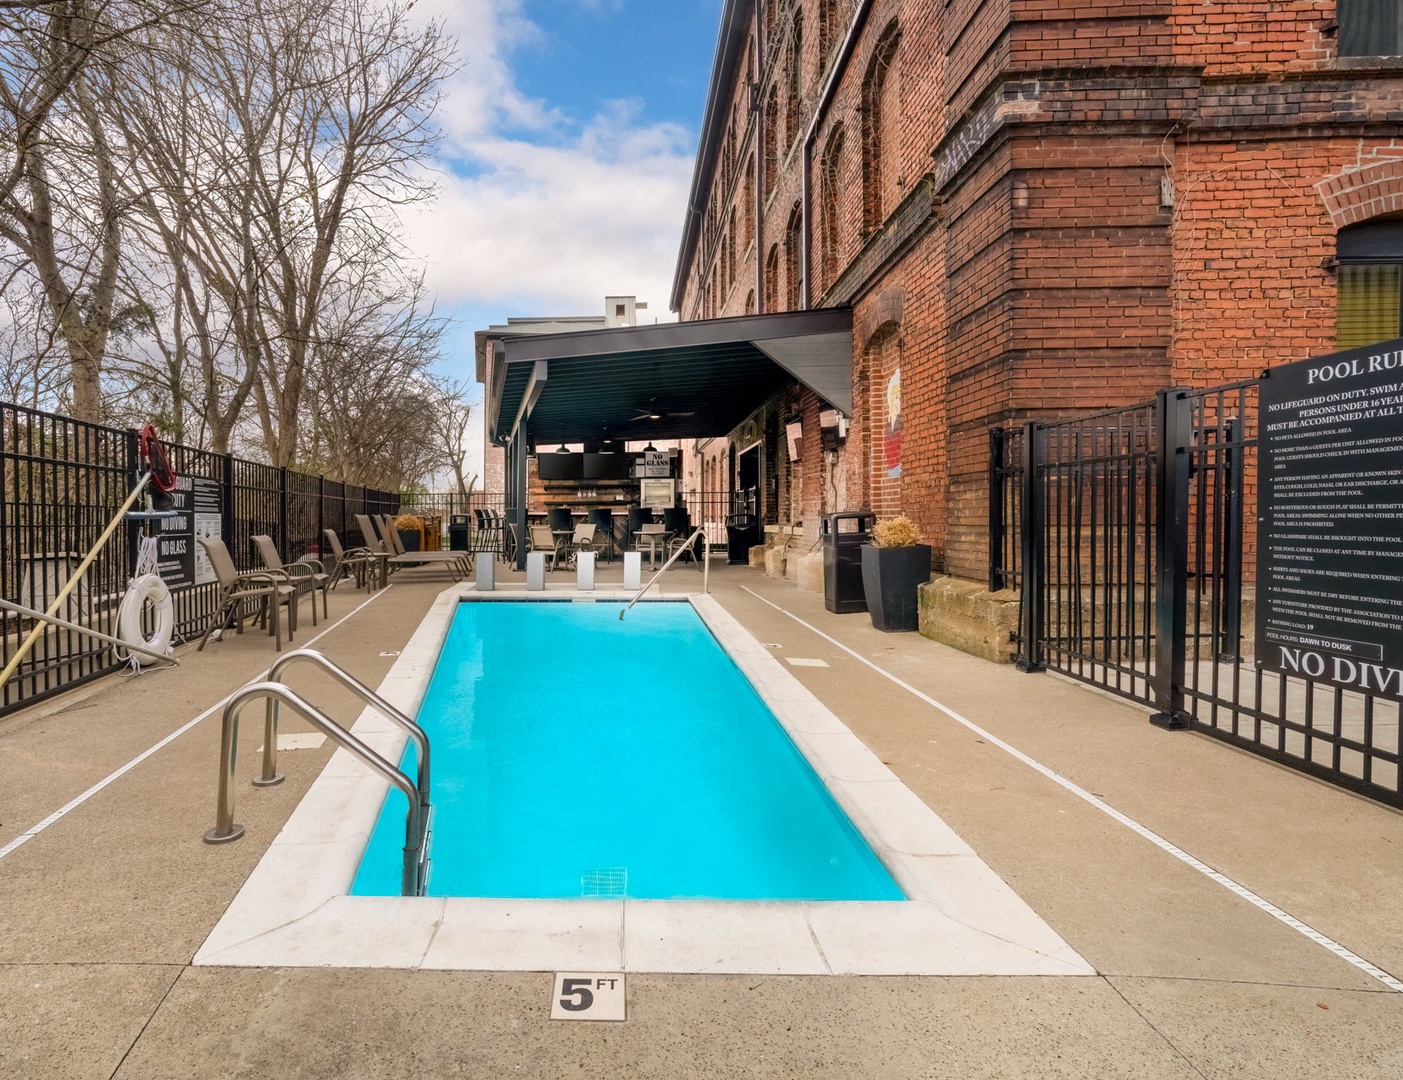 During the warmer months, make a splash in the communal pool available at The 1865